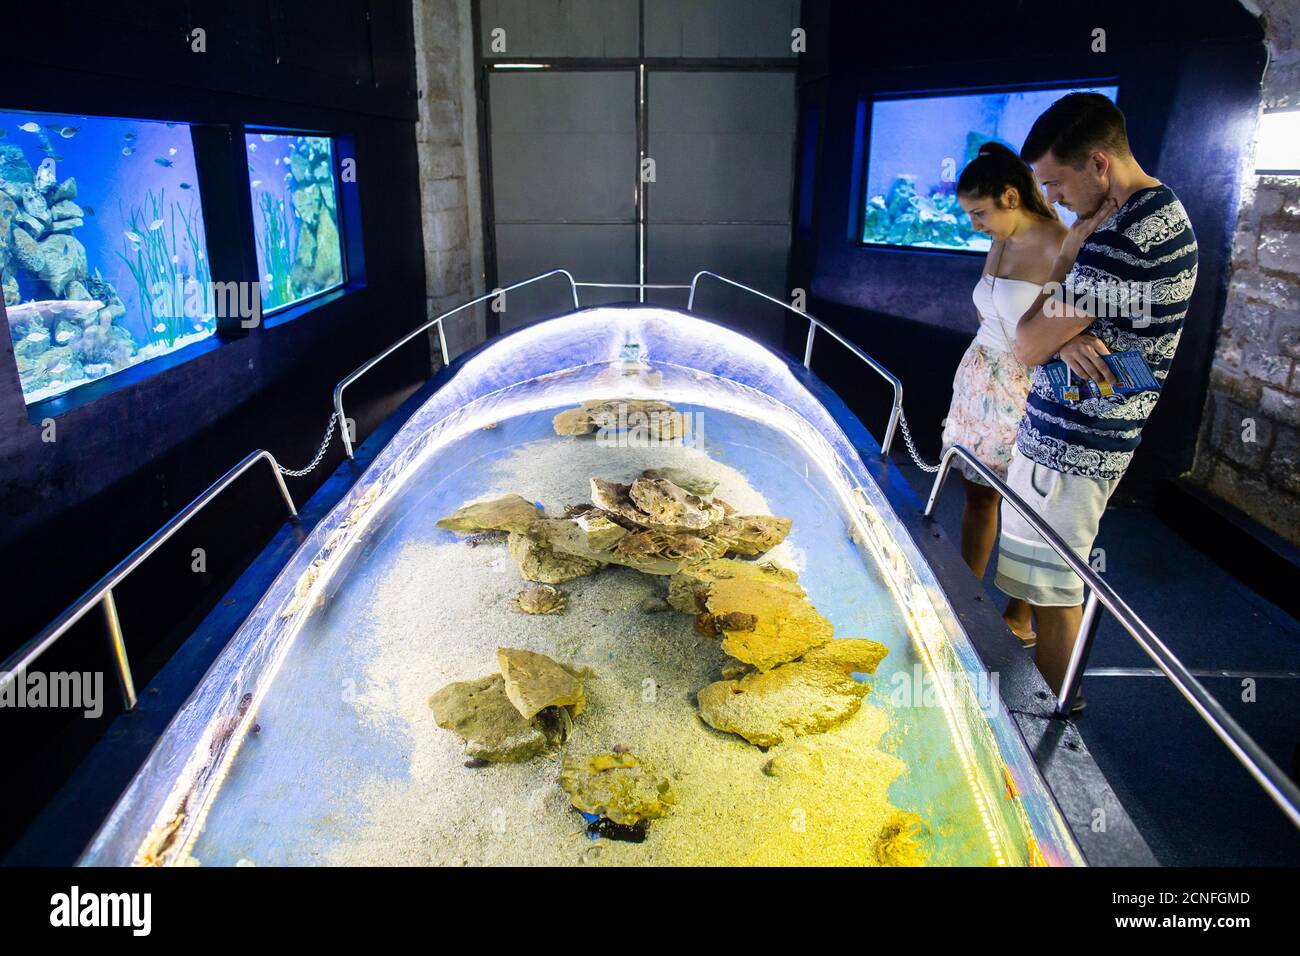 Visitors look at an exhibit at the Aquarium Pula, Croatia, July 26, 2018.  Housed in a more than 130-year-old fort in Croatia, Aquarium Pula boasts  species from the Adriatic as well as